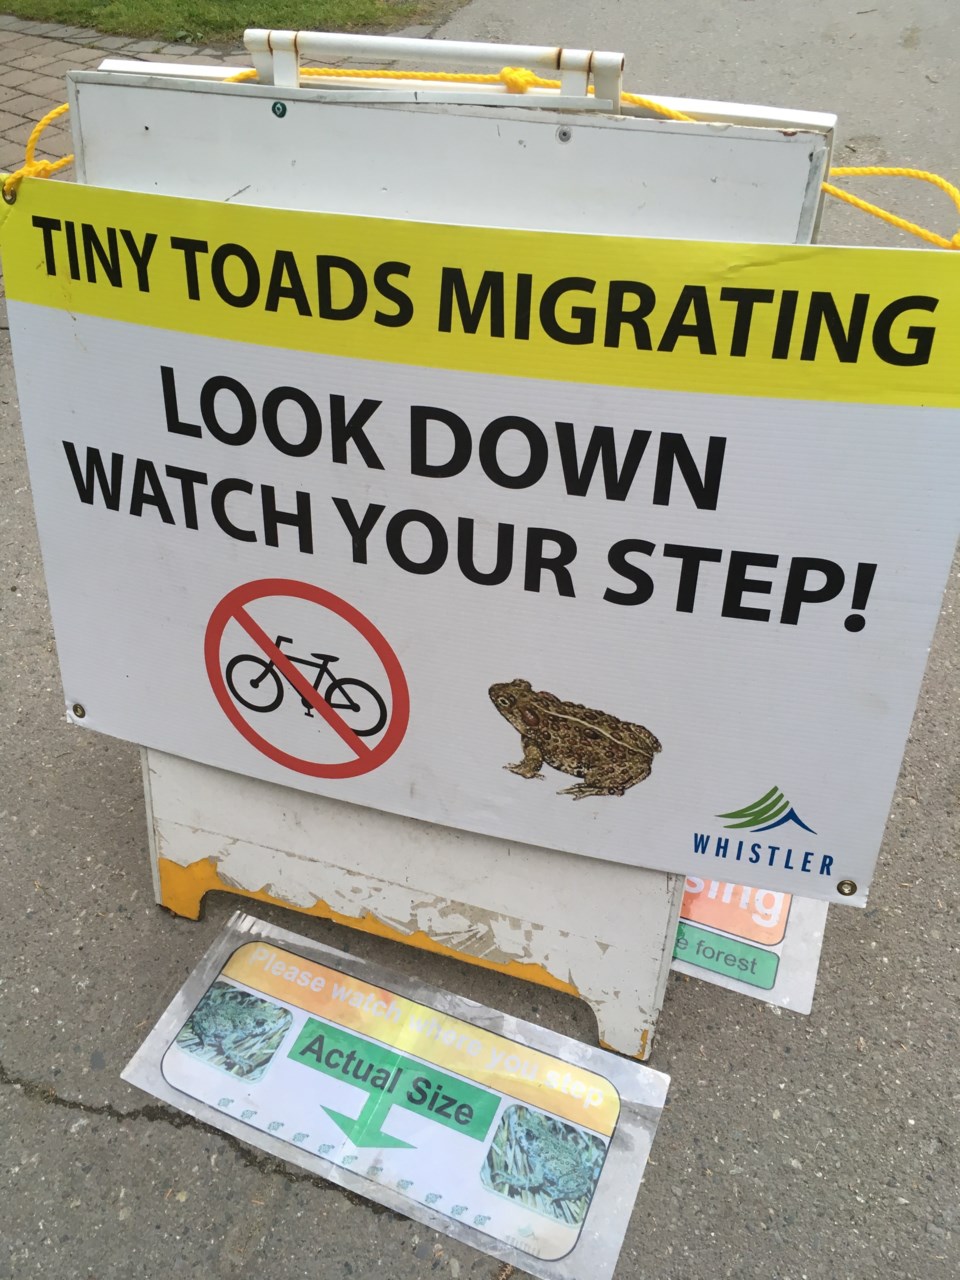 western_toad_migration_by_clare_ogilvie_23